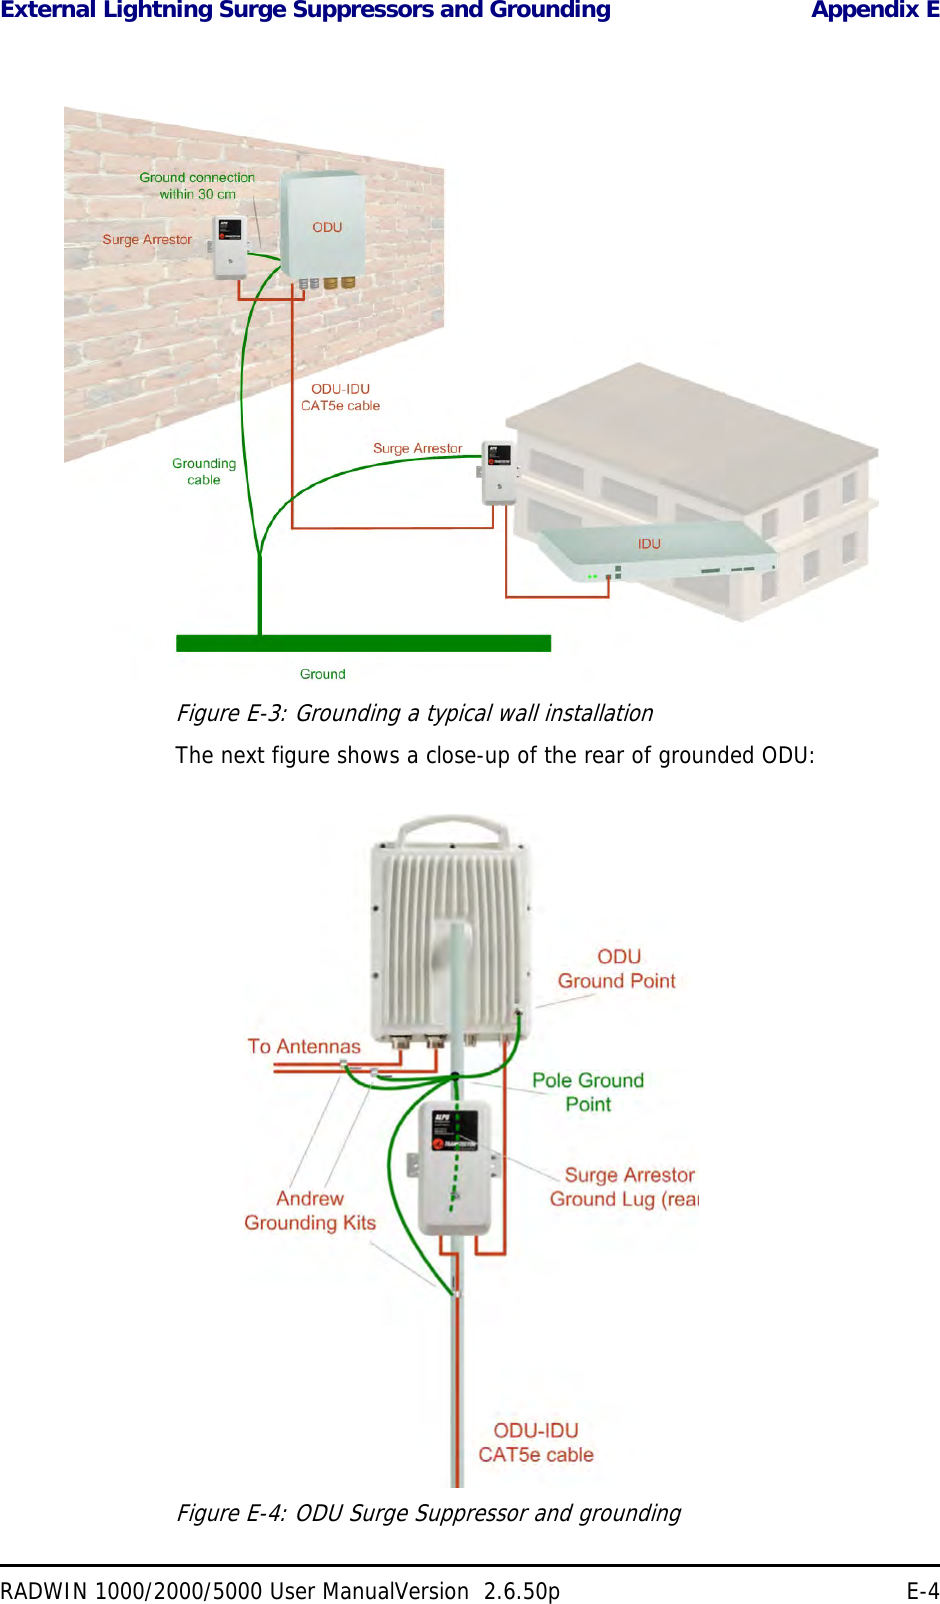 External Lightning Surge Suppressors and Grounding Appendix ERADWIN 1000/2000/5000 User ManualVersion  2.6.50p E-4Figure E-3: Grounding a typical wall installationThe next figure shows a close-up of the rear of grounded ODU:Figure E-4: ODU Surge Suppressor and grounding